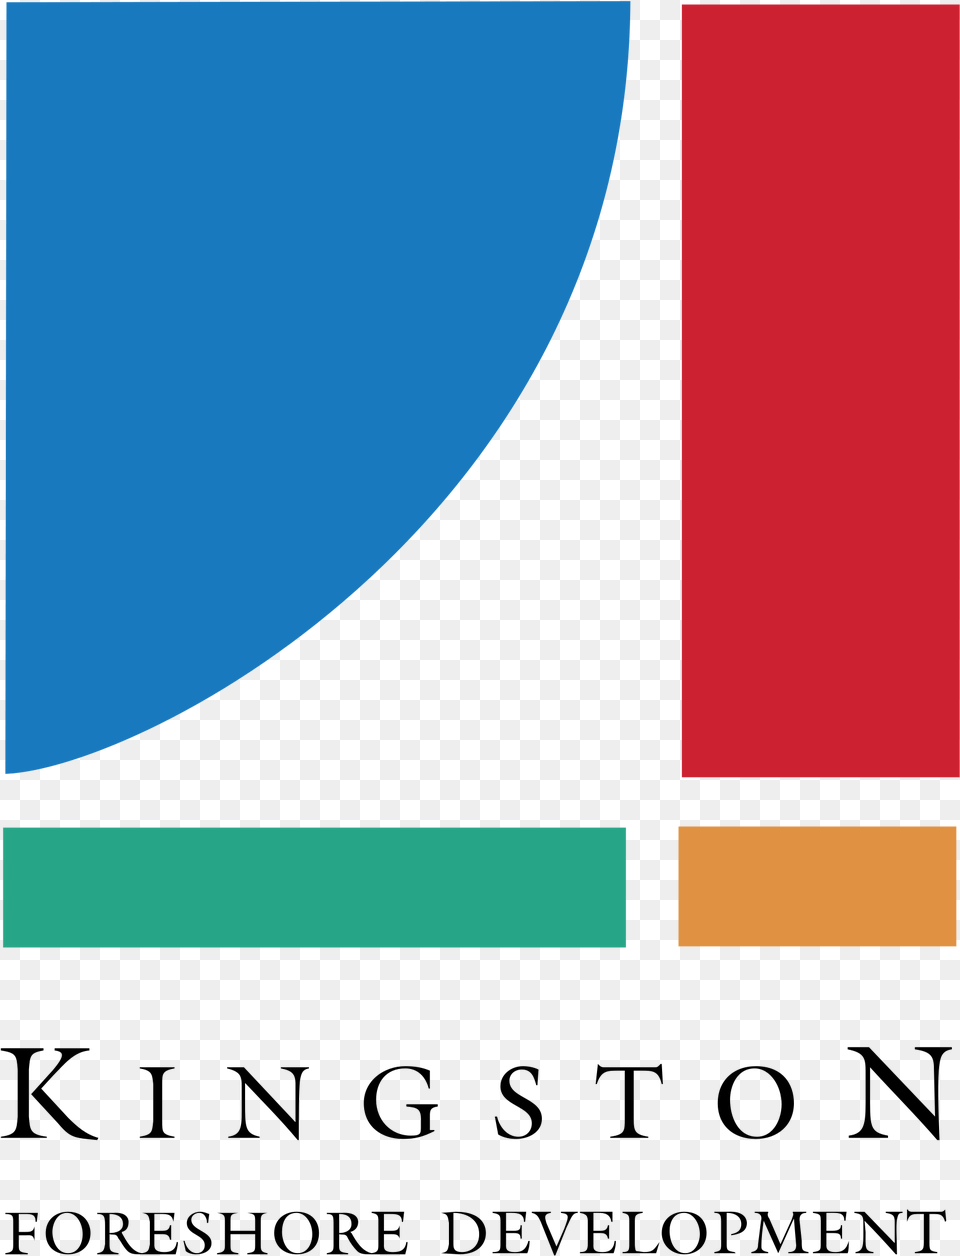 Kingston Logo Graphic Design, Astronomy, Moon, Nature, Night Png Image